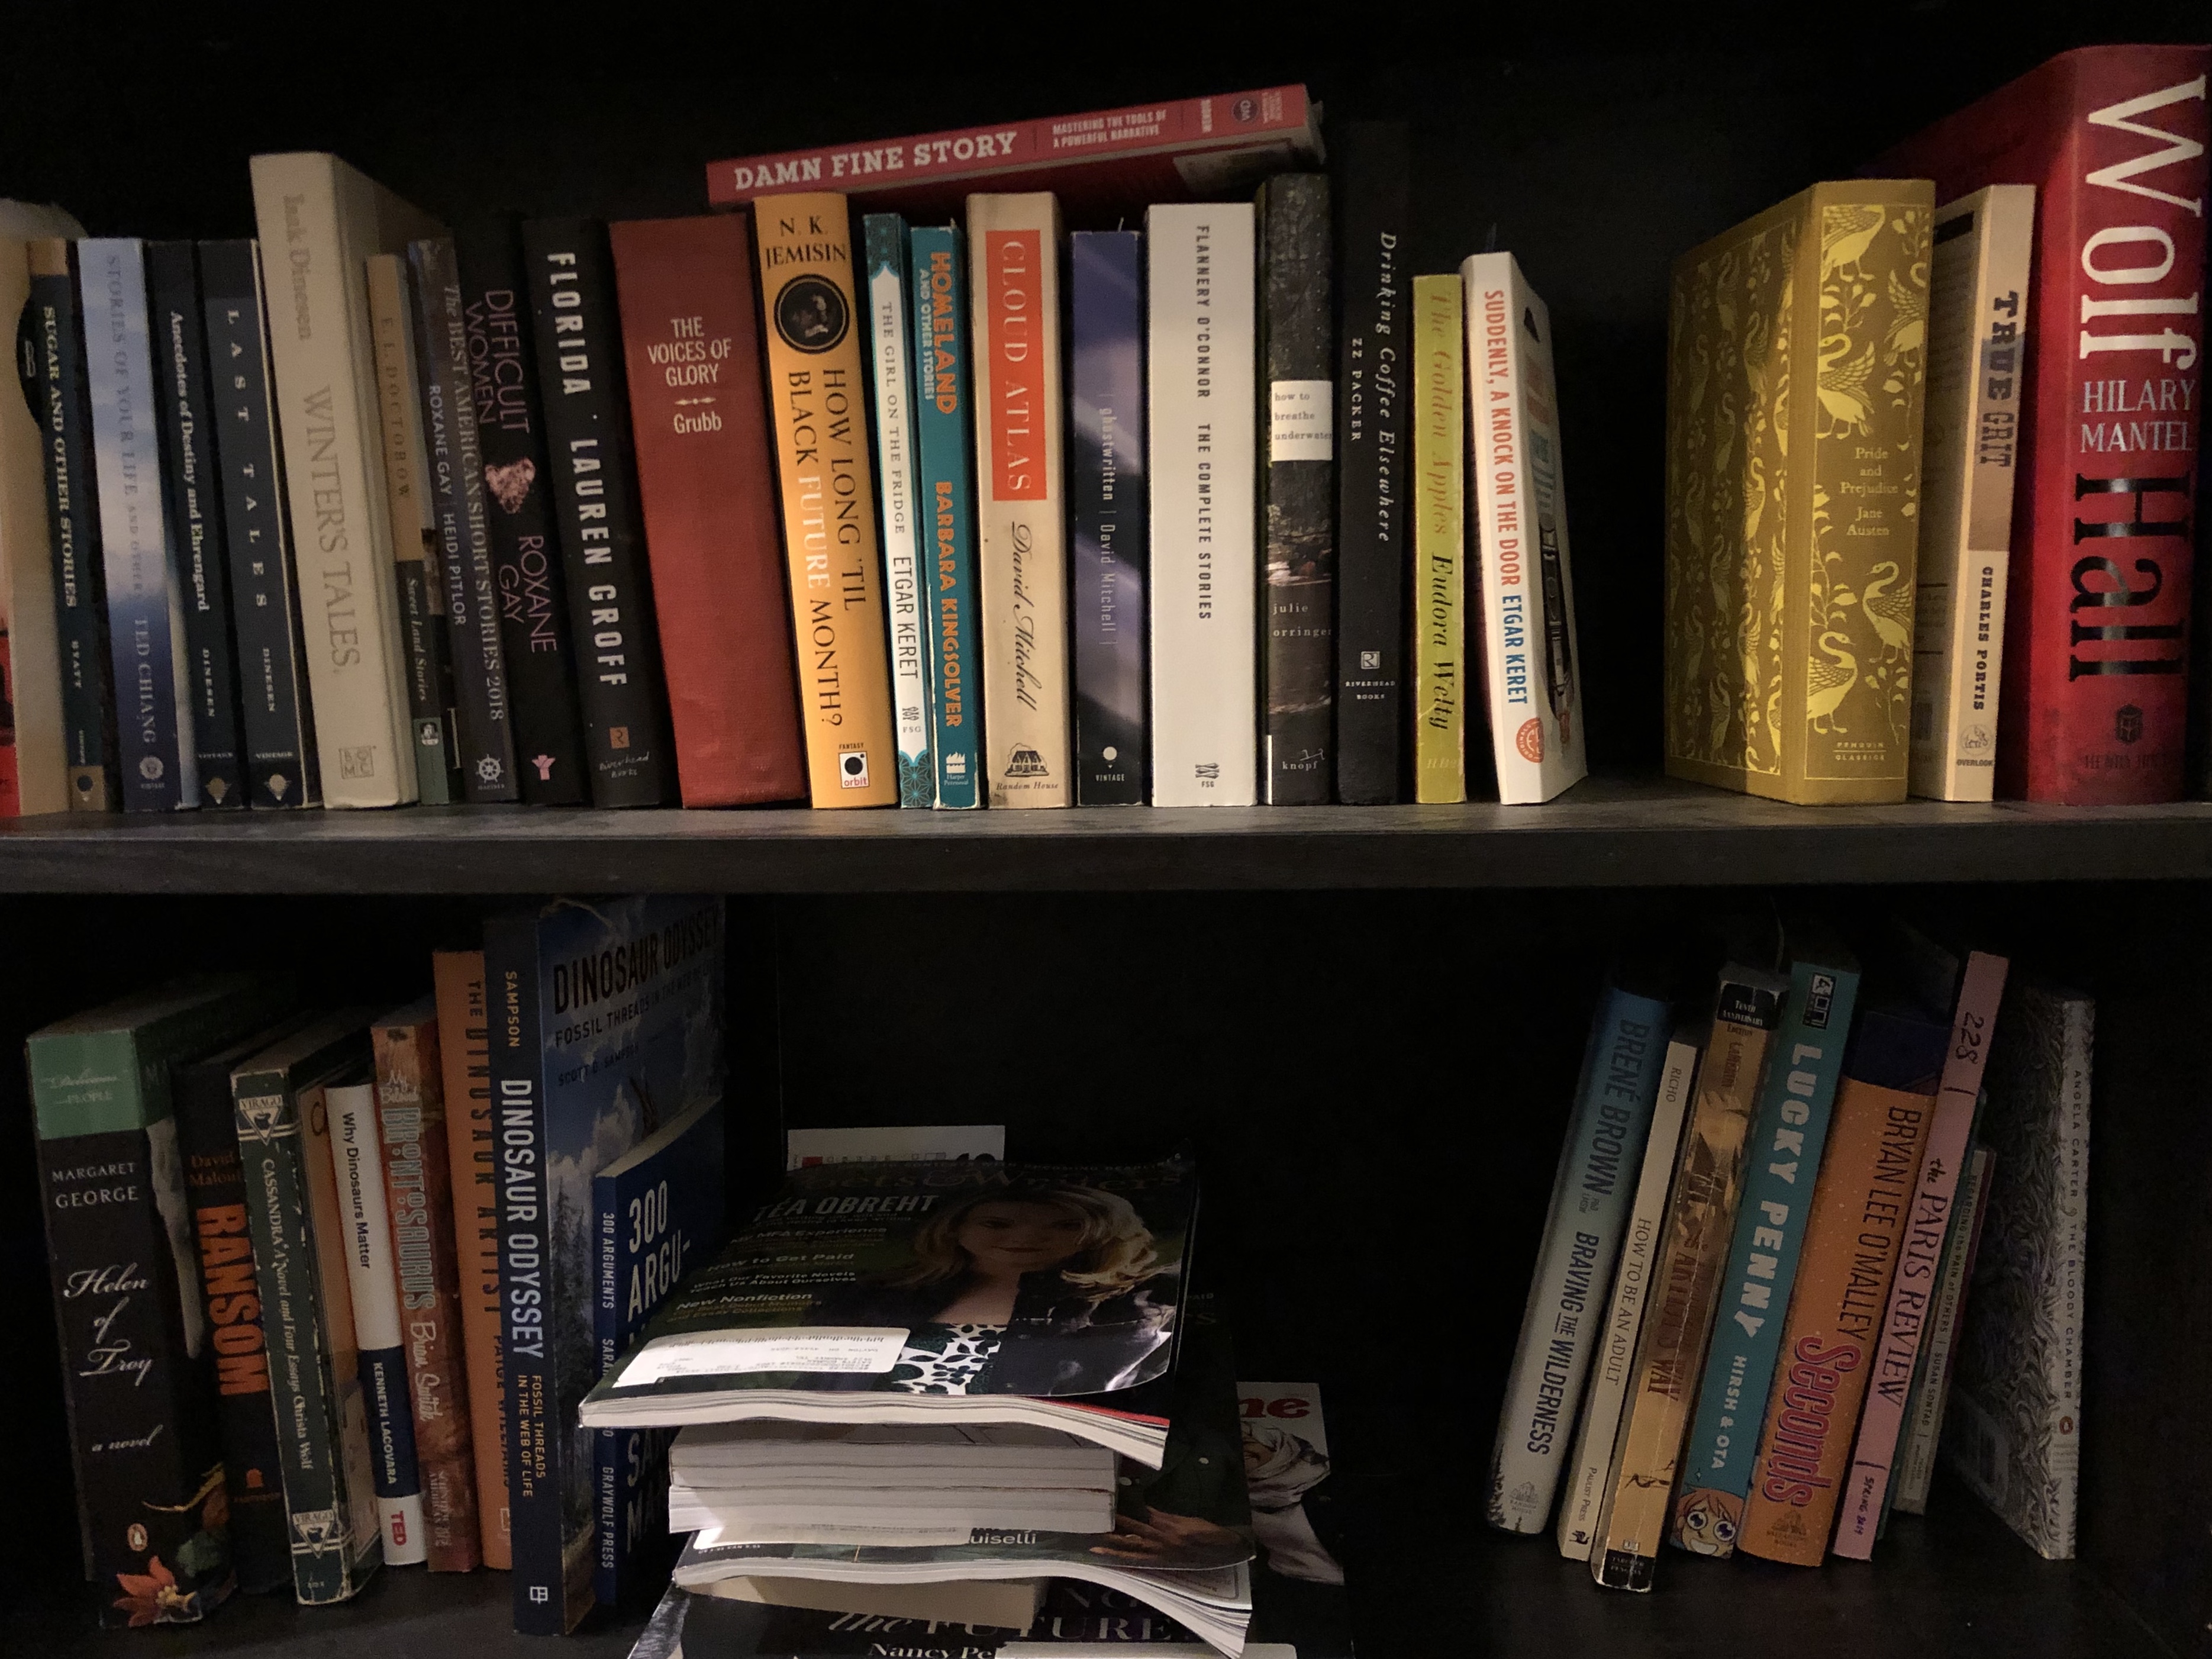 A picture of the shelves where I keep my curated set of books